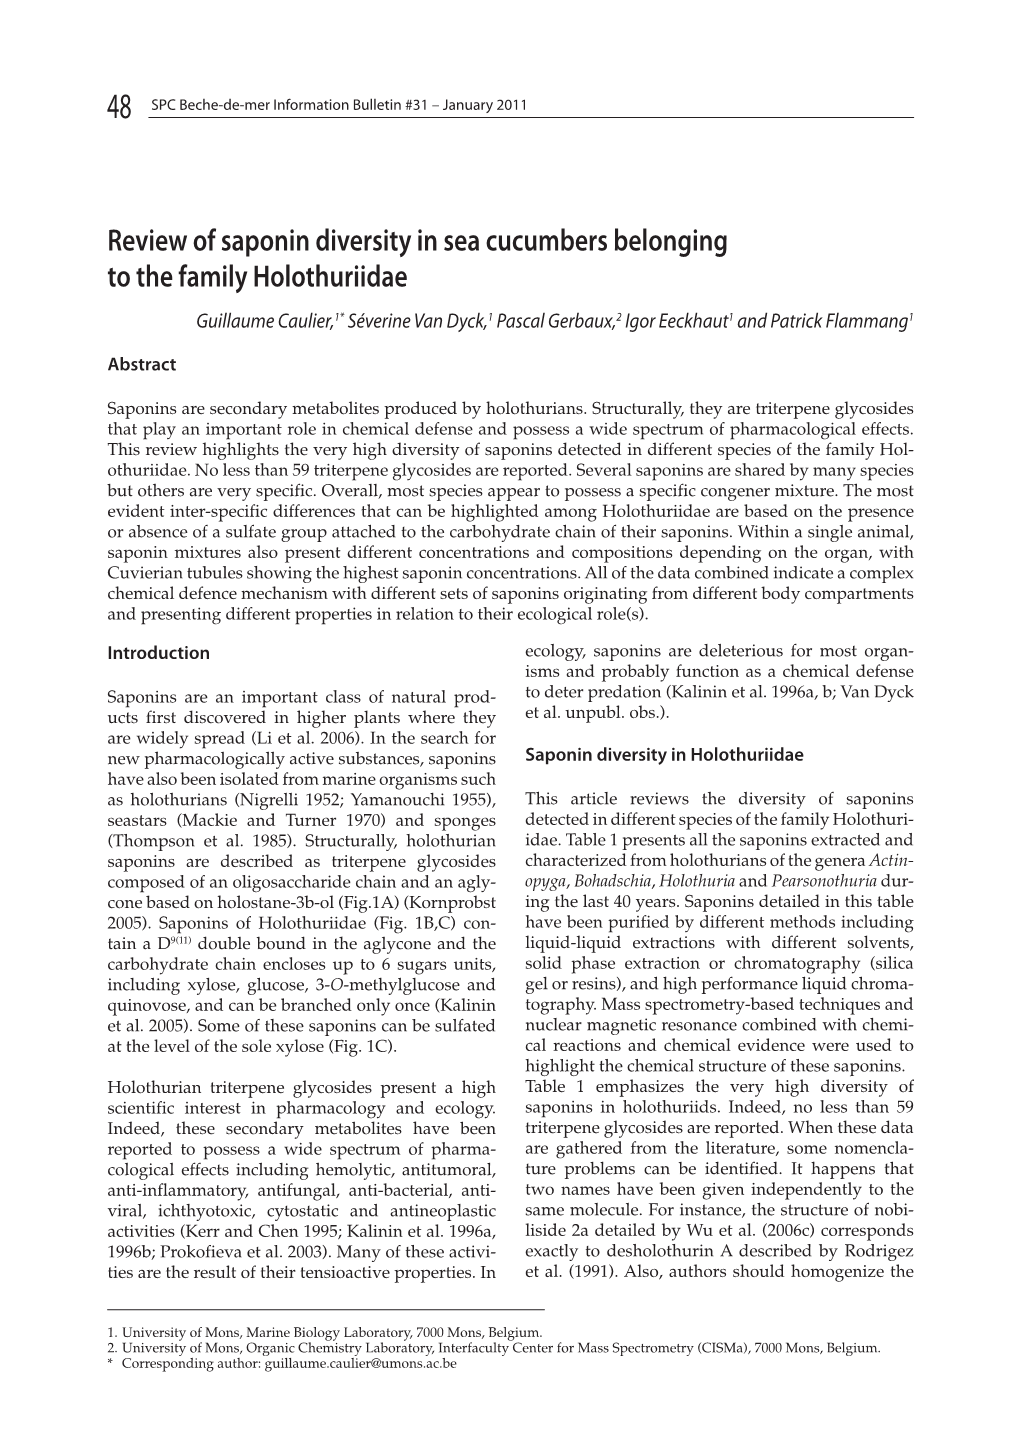 Review of Saponin Diversity in Sea Cucumbers Belonging to the Family